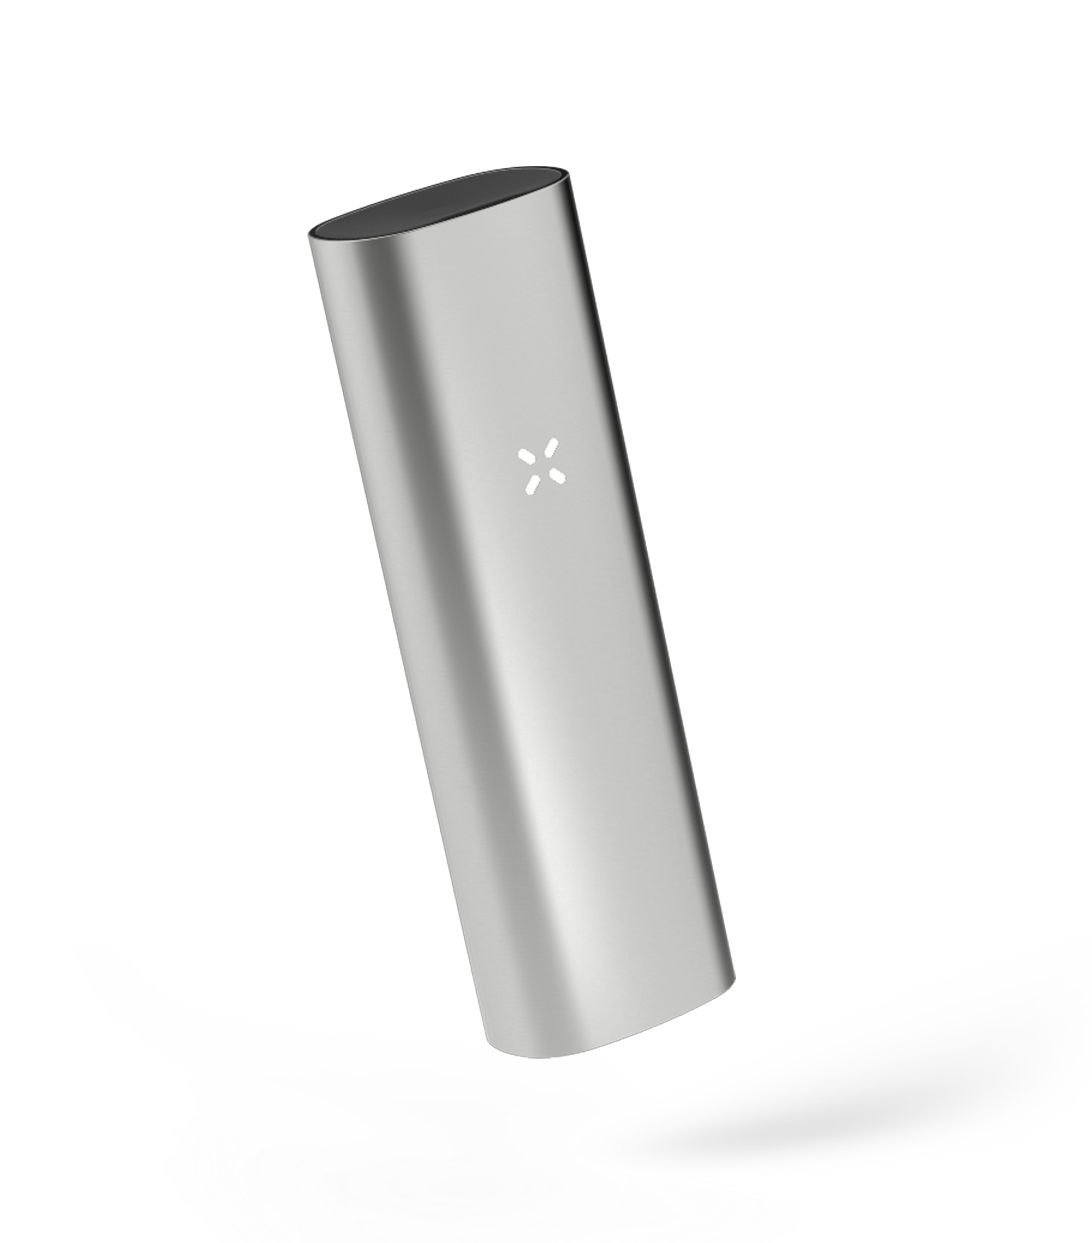 PAX 3 Dry Herb/Concentrate Vaporizer